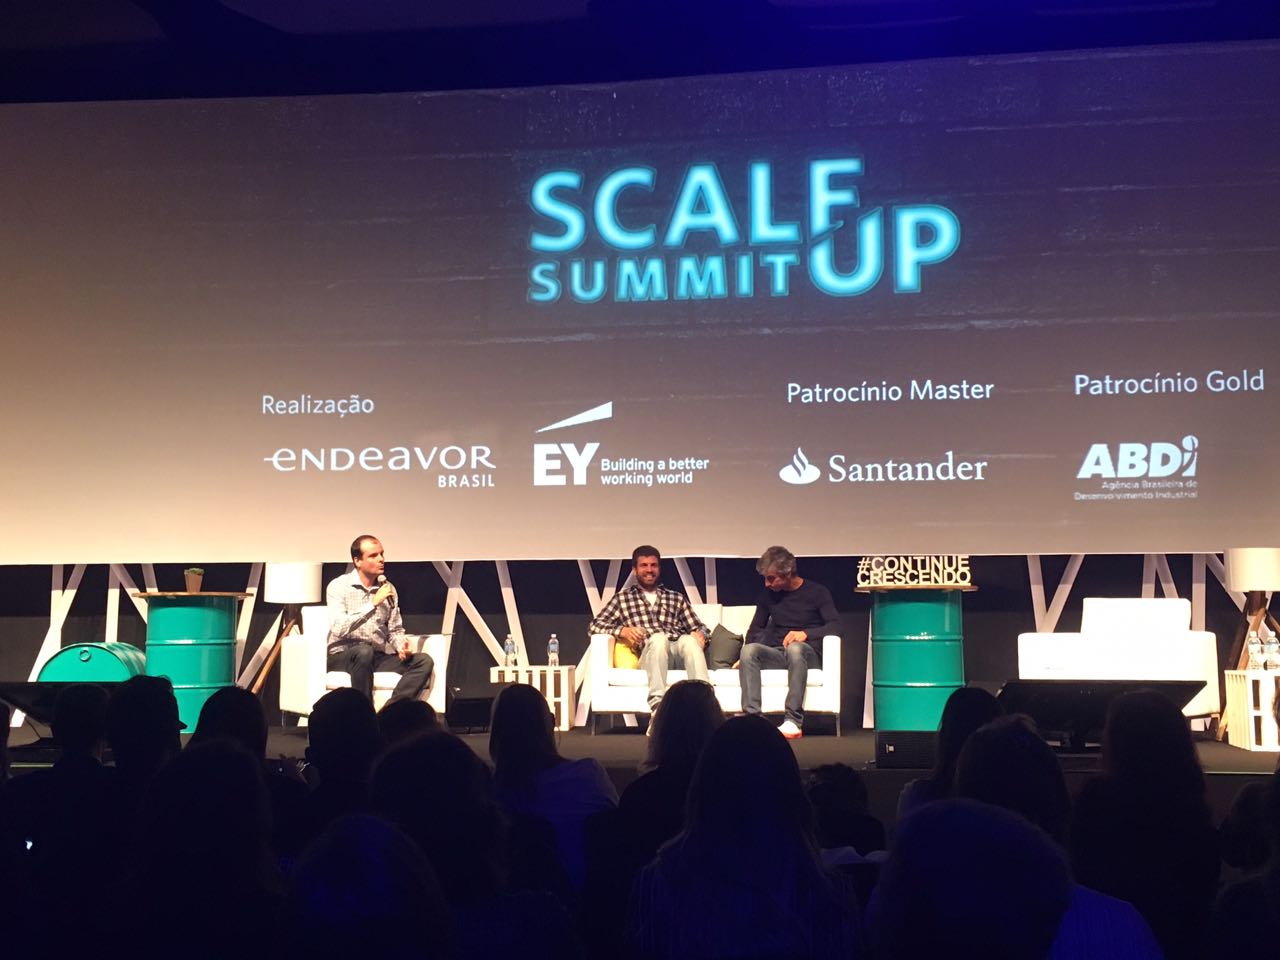 scale up summit 2017